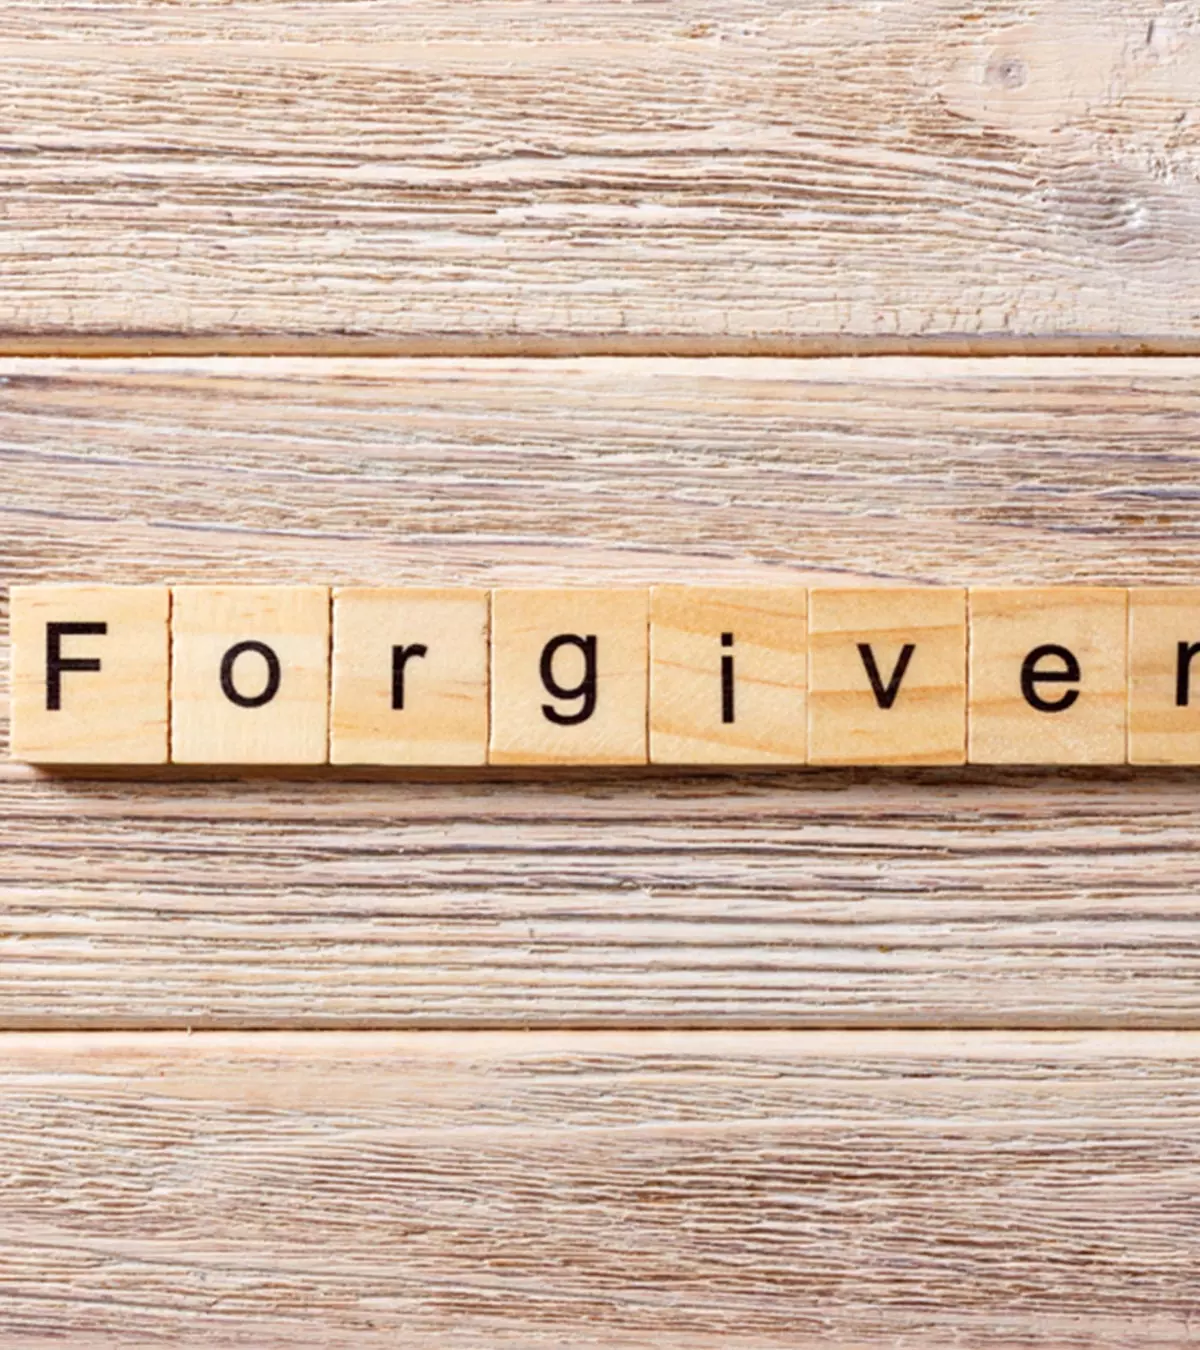 45+ Forgiveness Poems That Will Change Your Outlook On Life